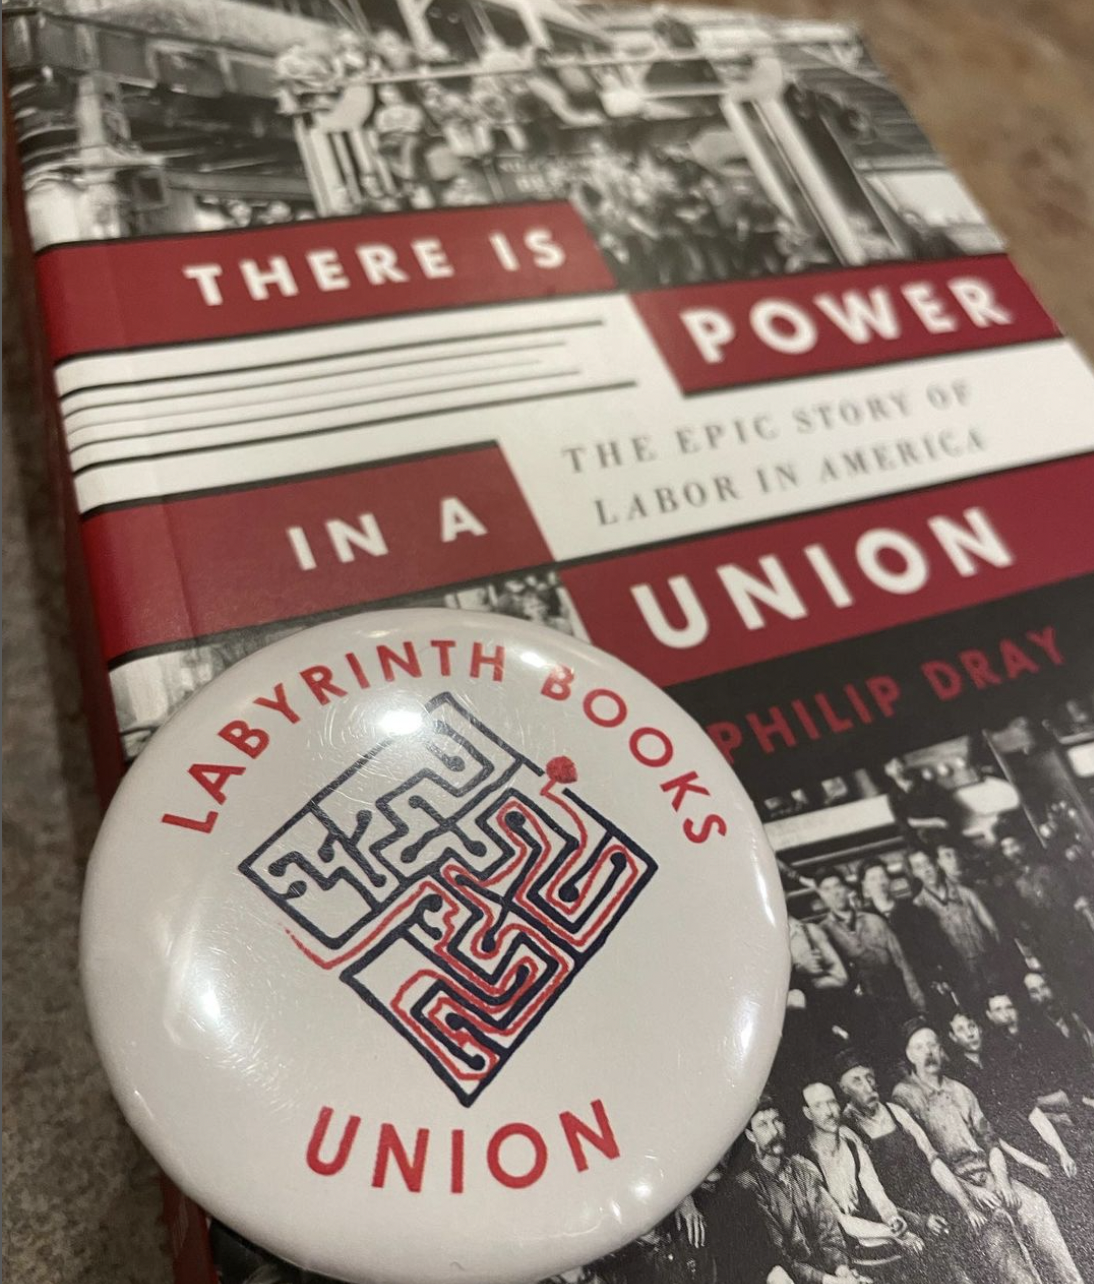 union pin reading labyrinth books union lays over a labor book